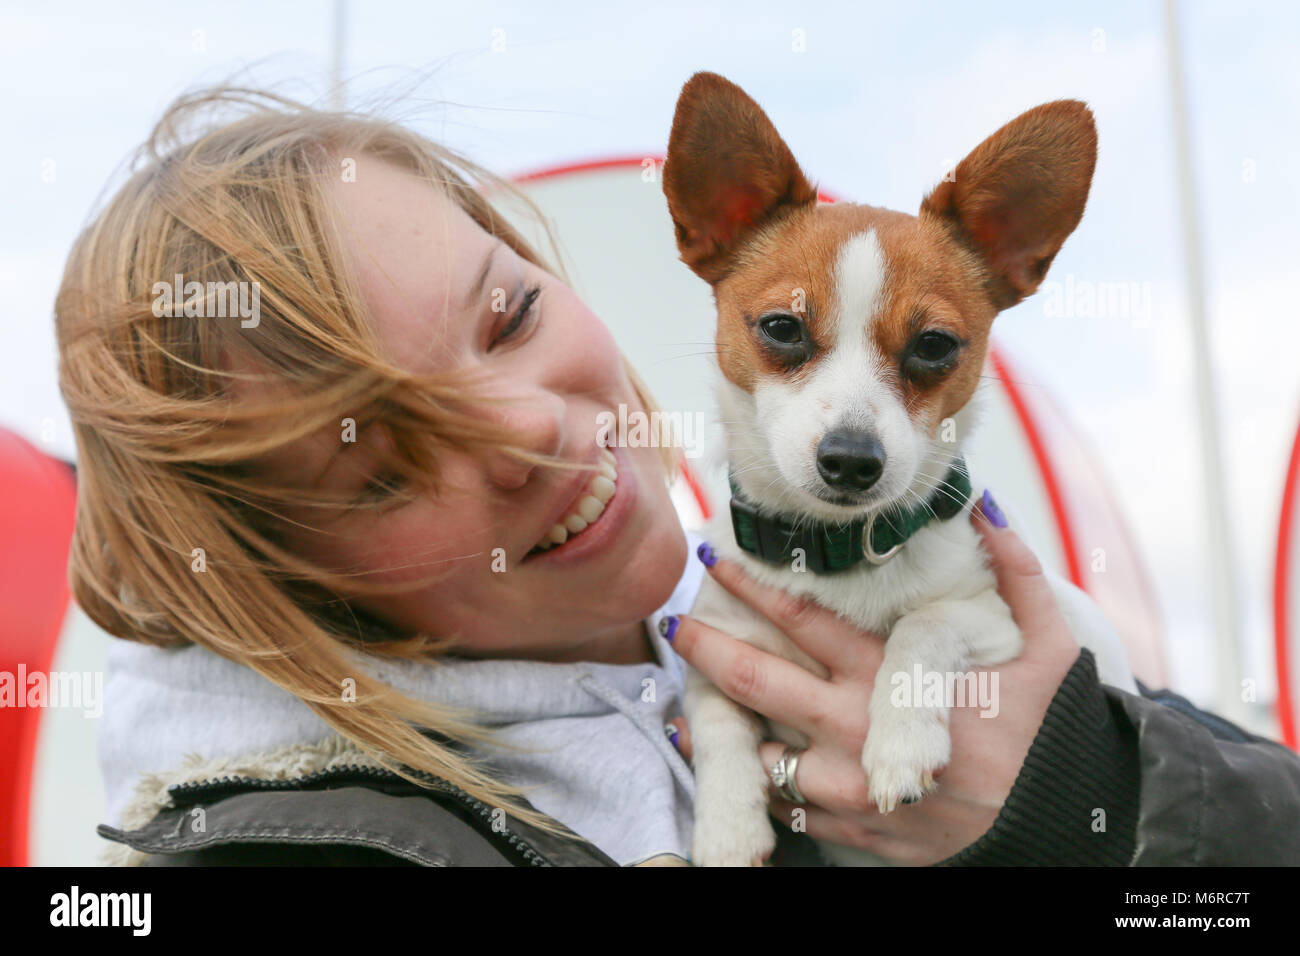 At the launch of Crufts 2018 at the NEC, Birmingham, Envy, a Papillon and Jack Russell cross, is held by her owner Megan Smyth. Stock Photo